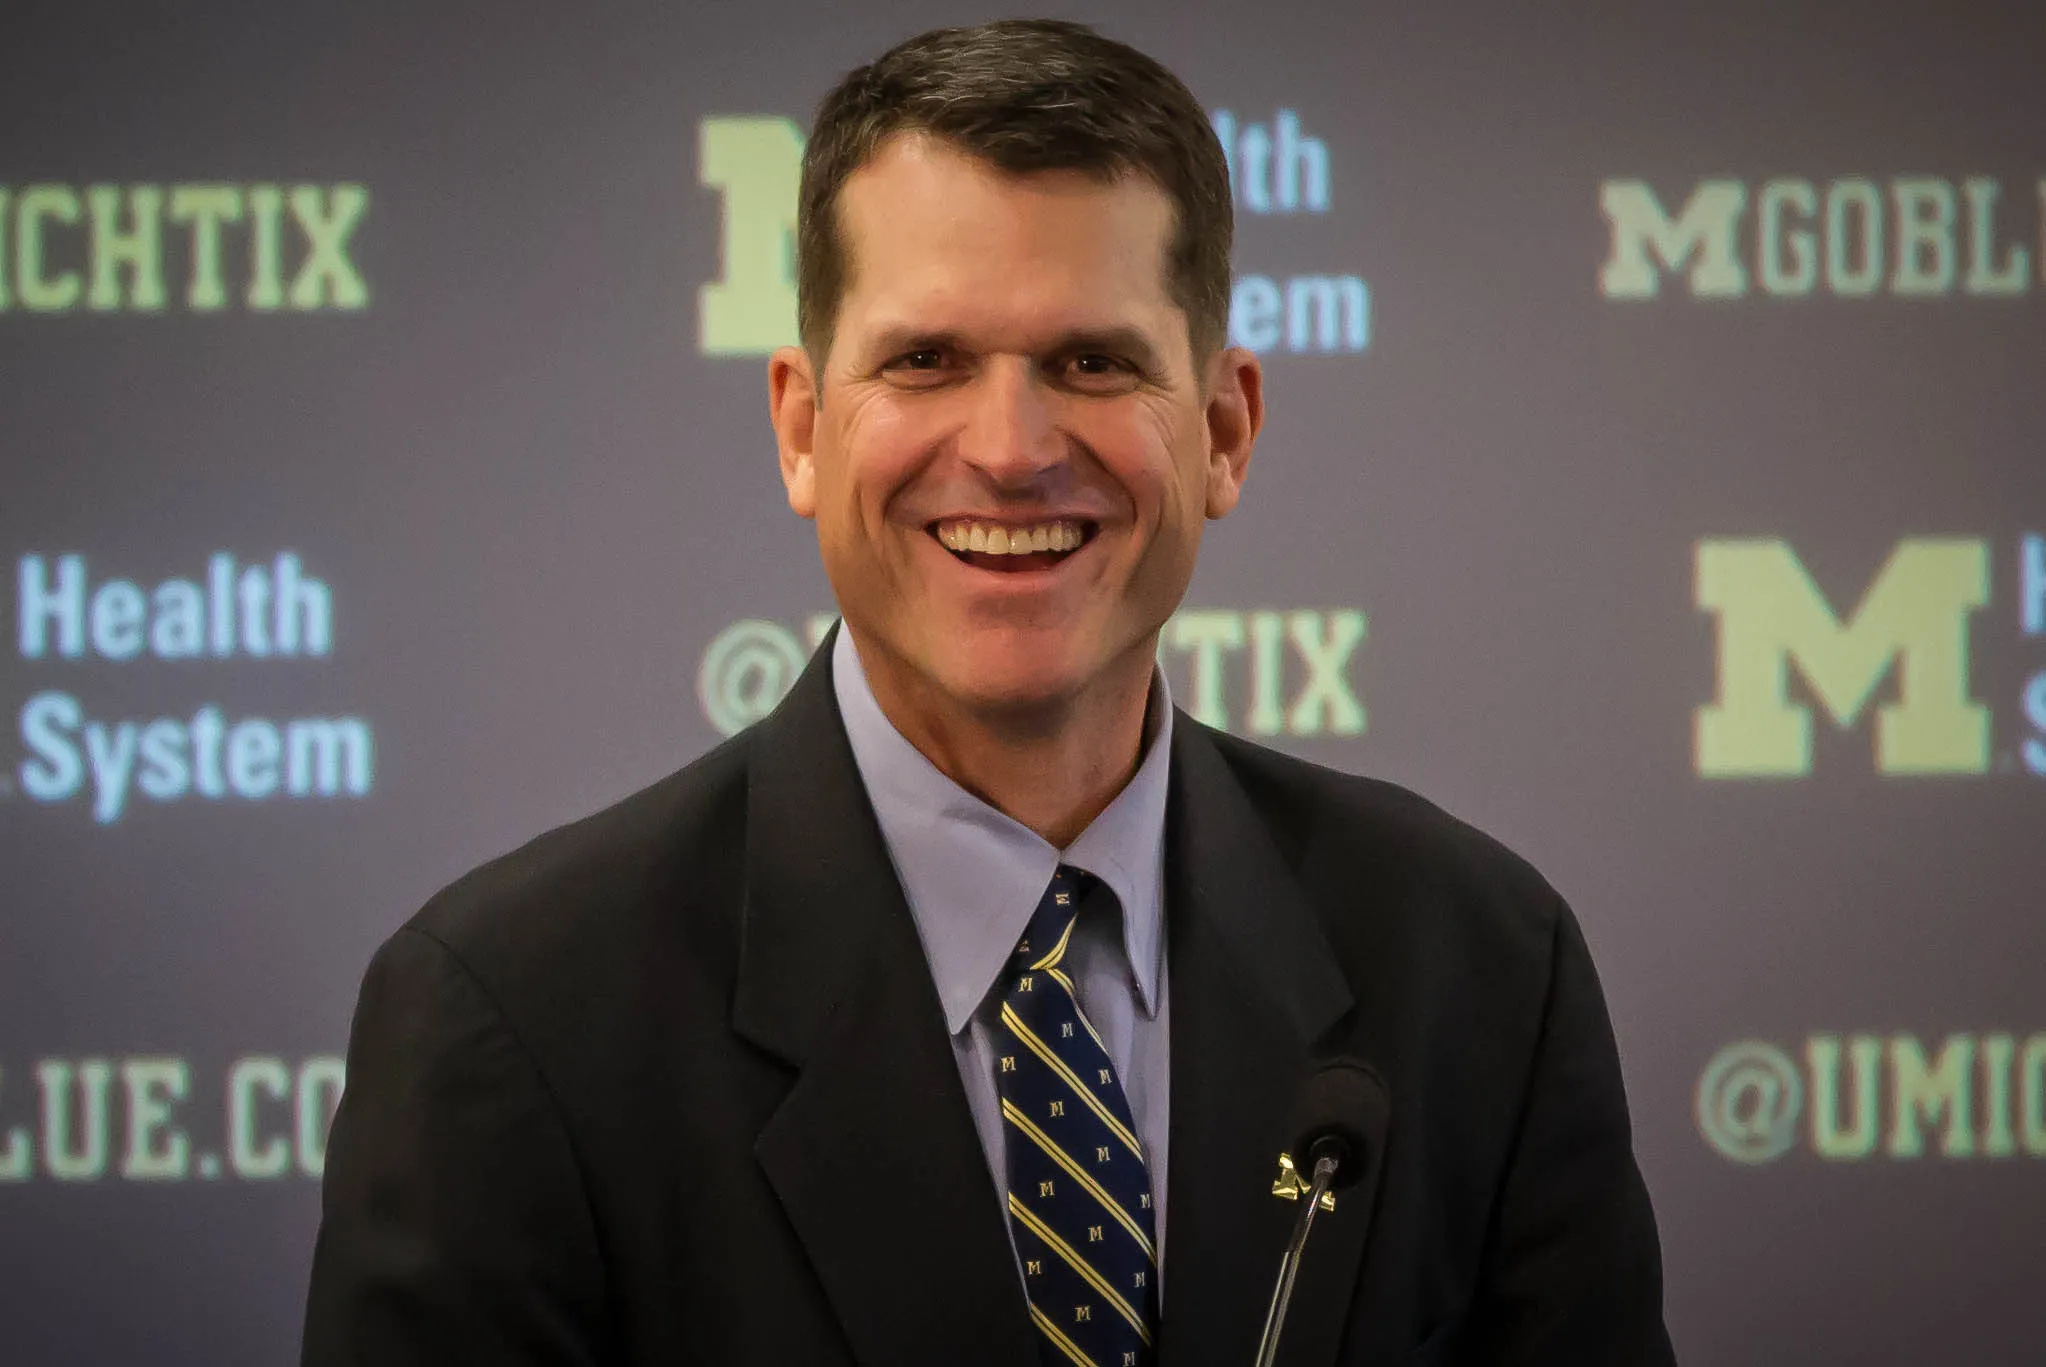 University of Michigan head coach Jim Harbaugh at his introductory press conference on Dec. 30, 2014.?w=200&h=150